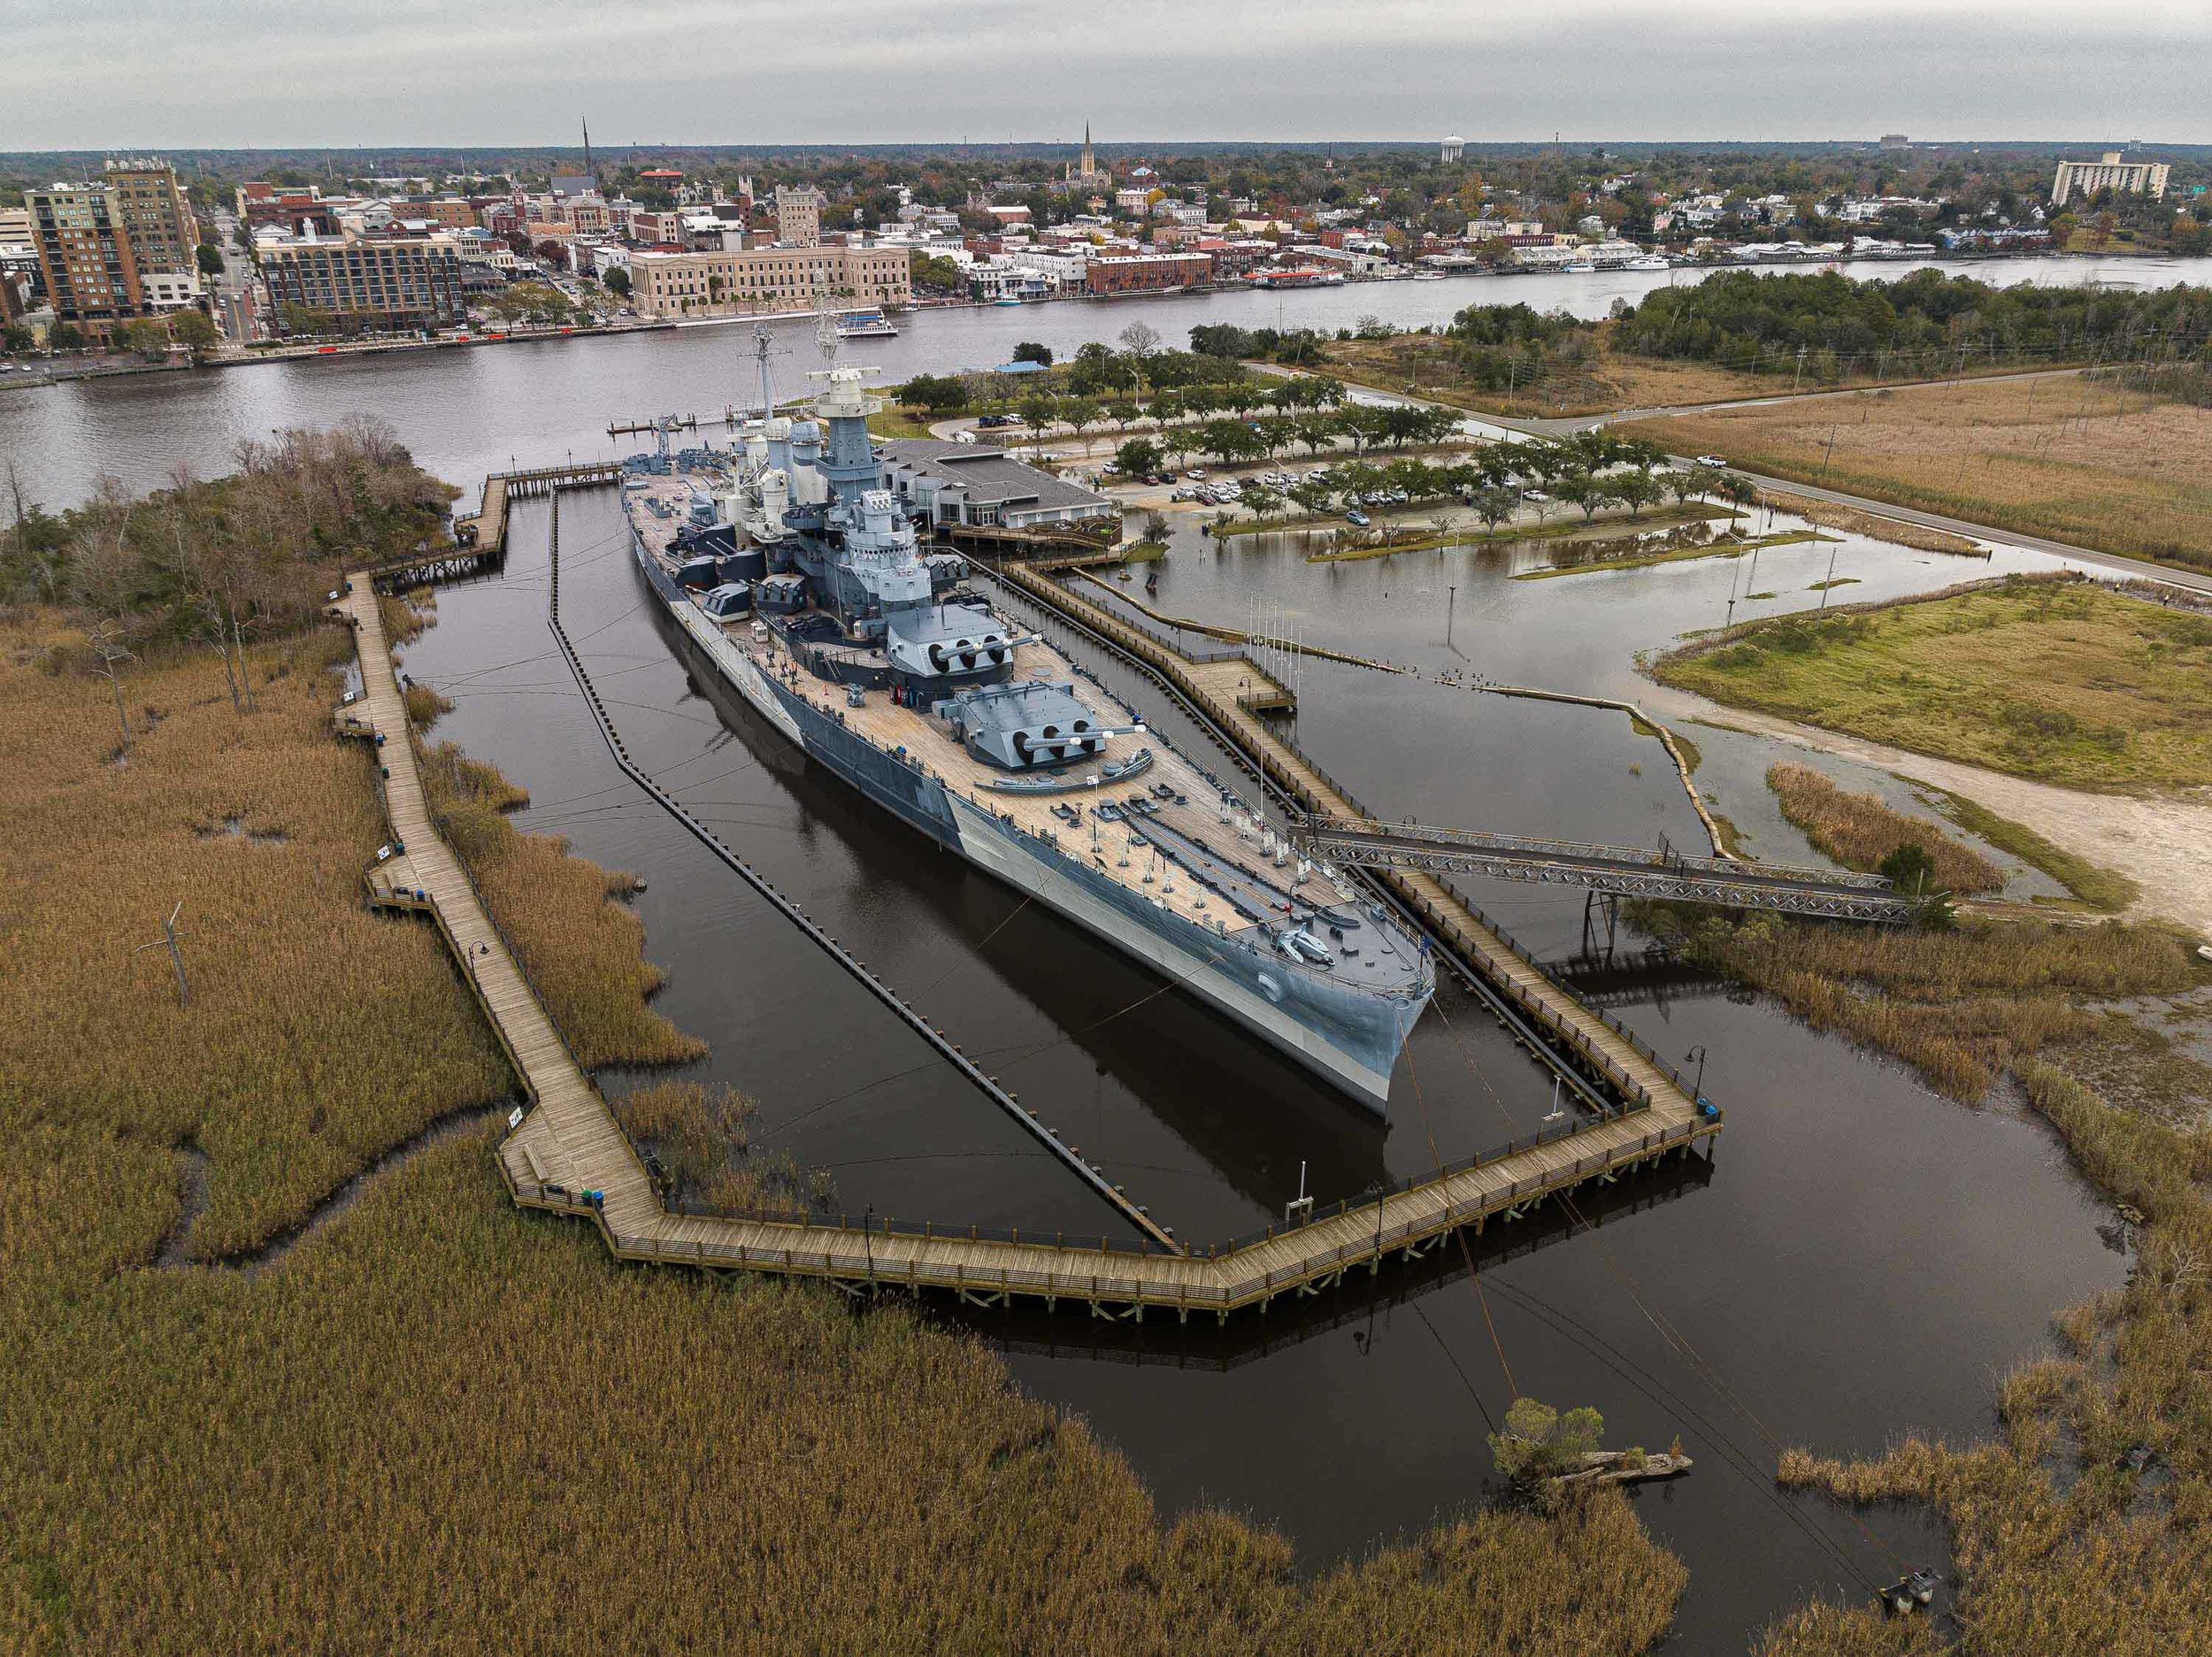  A drone view of the U.S.S. North Carolina Battleship National Historic Site, and its flooded parking lot at high tide. A high tide exacerbated by a king tide and sea level rise caused by human-induced climate change flooded the parking lot. For The 